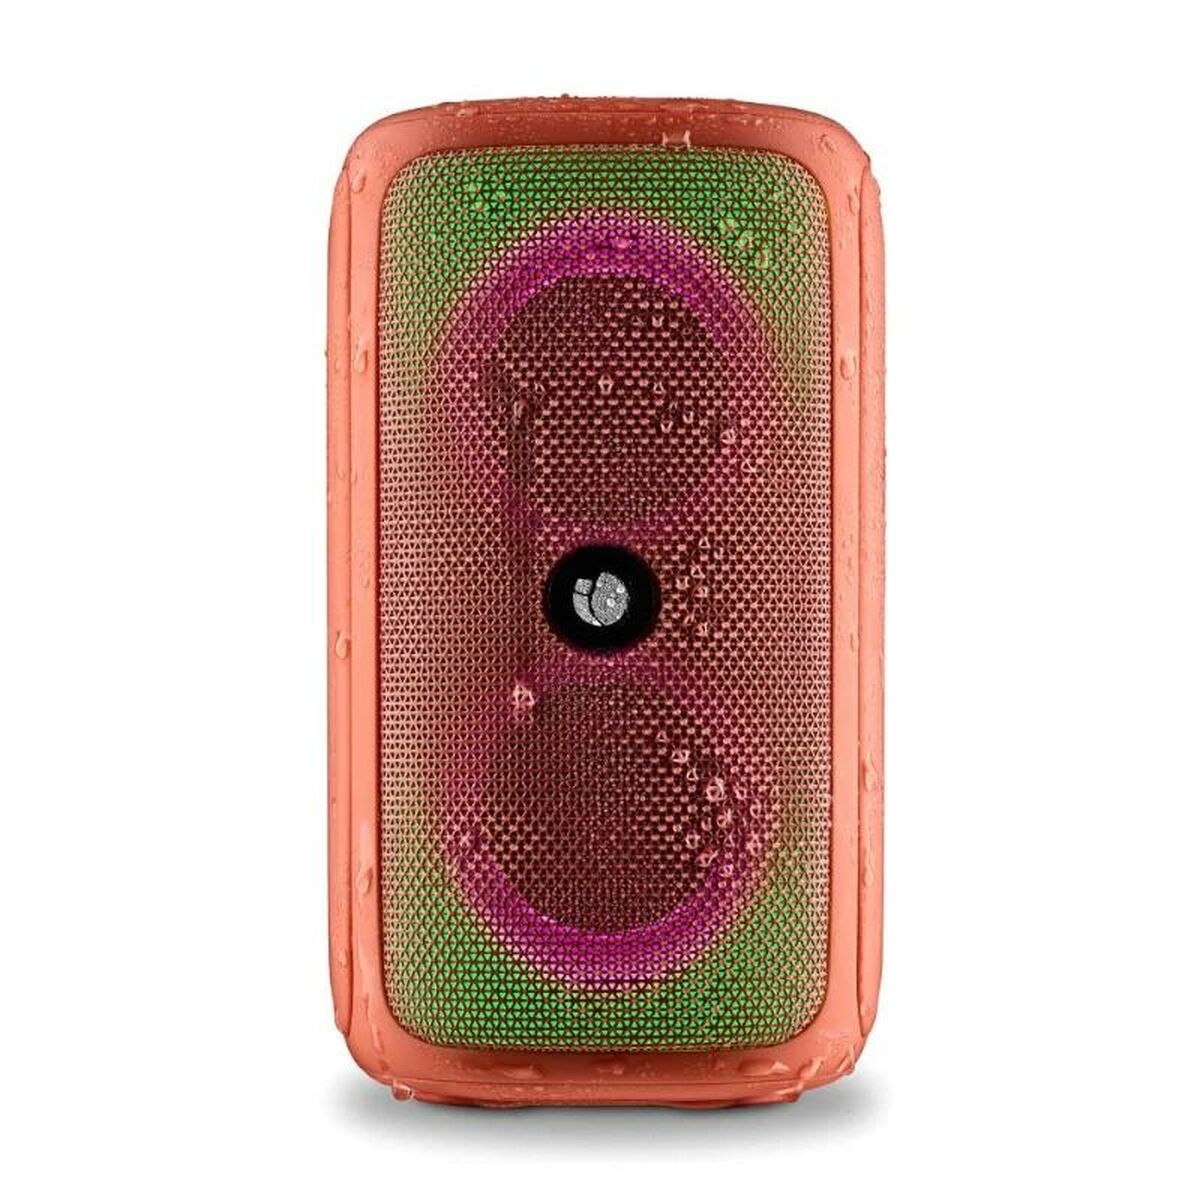 Portable Bluetooth Speakers NGS ROLLERBEAST, NGS, Electronics, Mobile communication and accessories, portable-bluetooth-speakers-ngs-rollerbeast, Brand_NGS, category-reference-2609, category-reference-2882, category-reference-2923, category-reference-t-19653, category-reference-t-21311, category-reference-t-4036, category-reference-t-4037, Condition_NEW, entertainment, music, Price_50 - 100, telephones & tablets, wifi y bluetooth, RiotNook